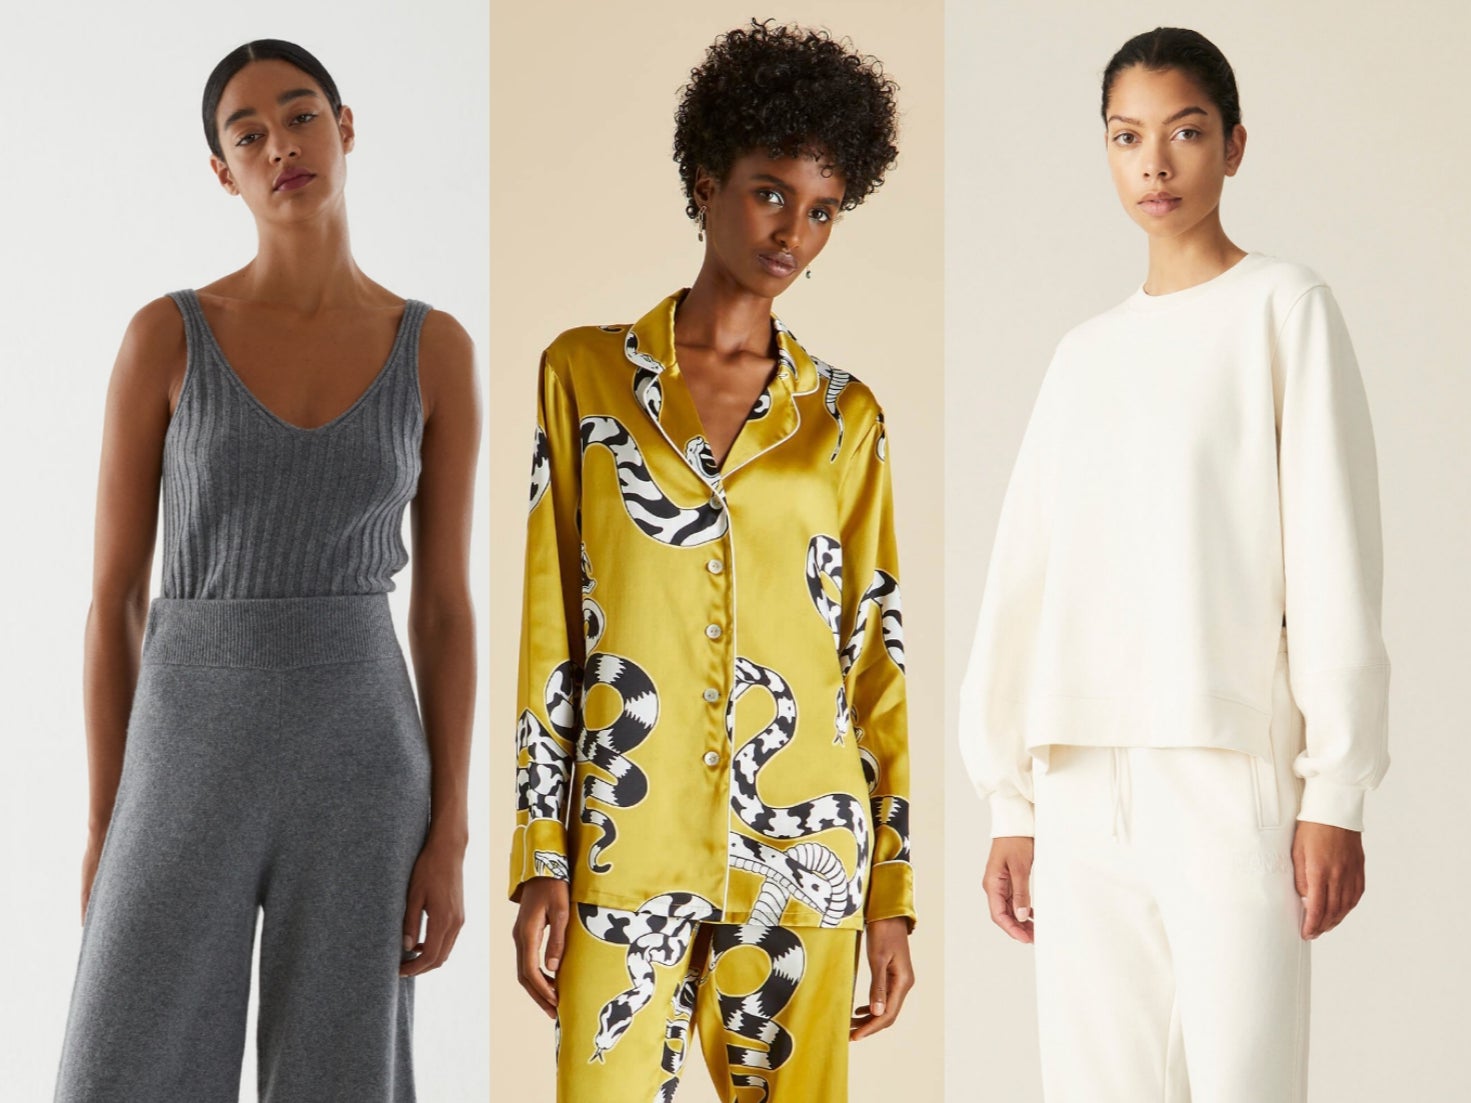 Zara fans in frenzy over arrival of stylish new dress collection